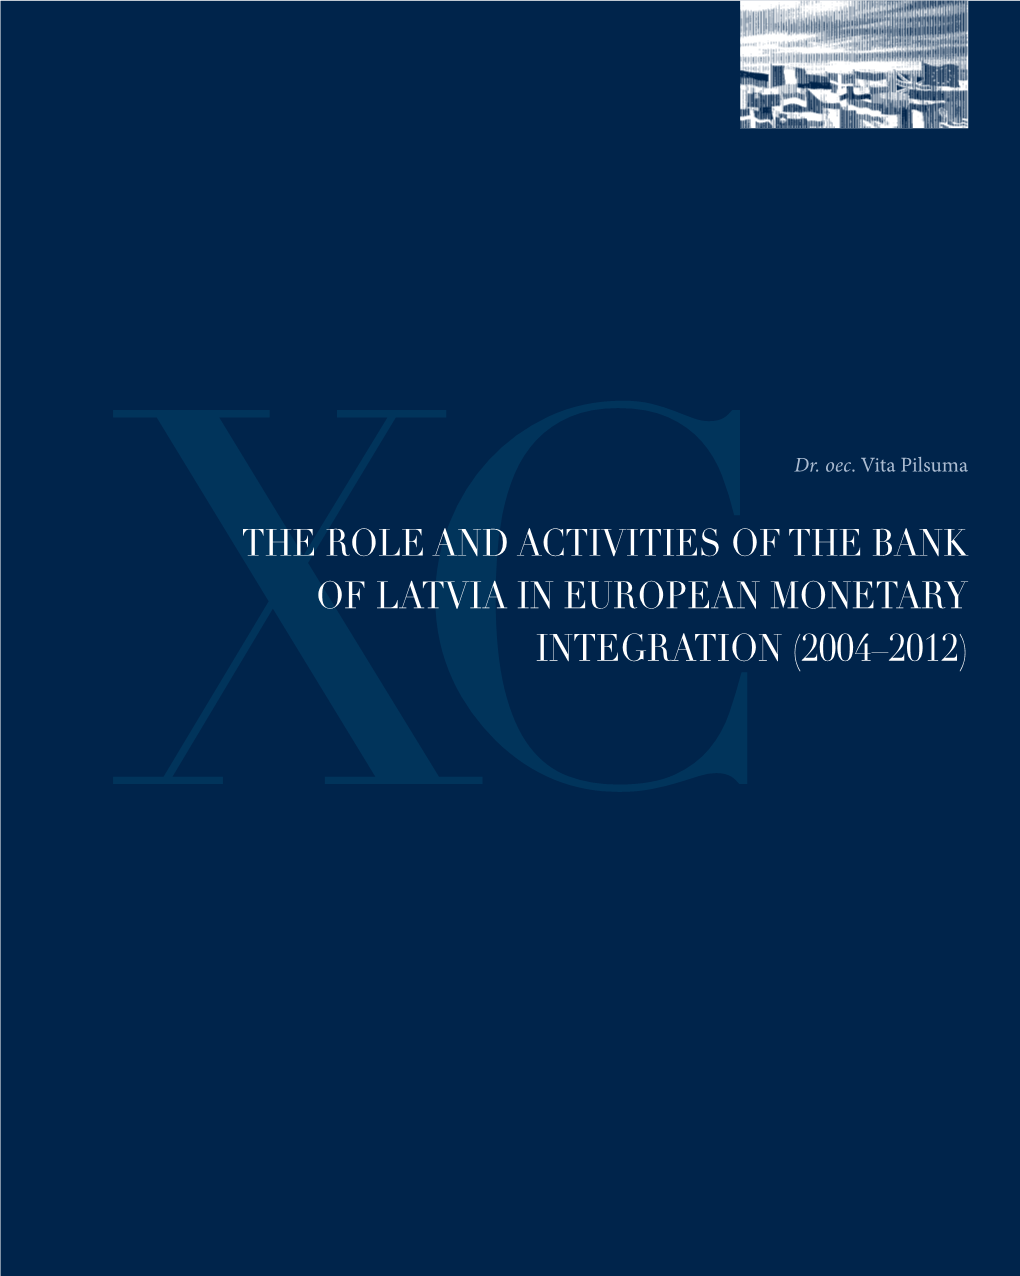 Xcthe Role and Activities of the Bank of Latvia In